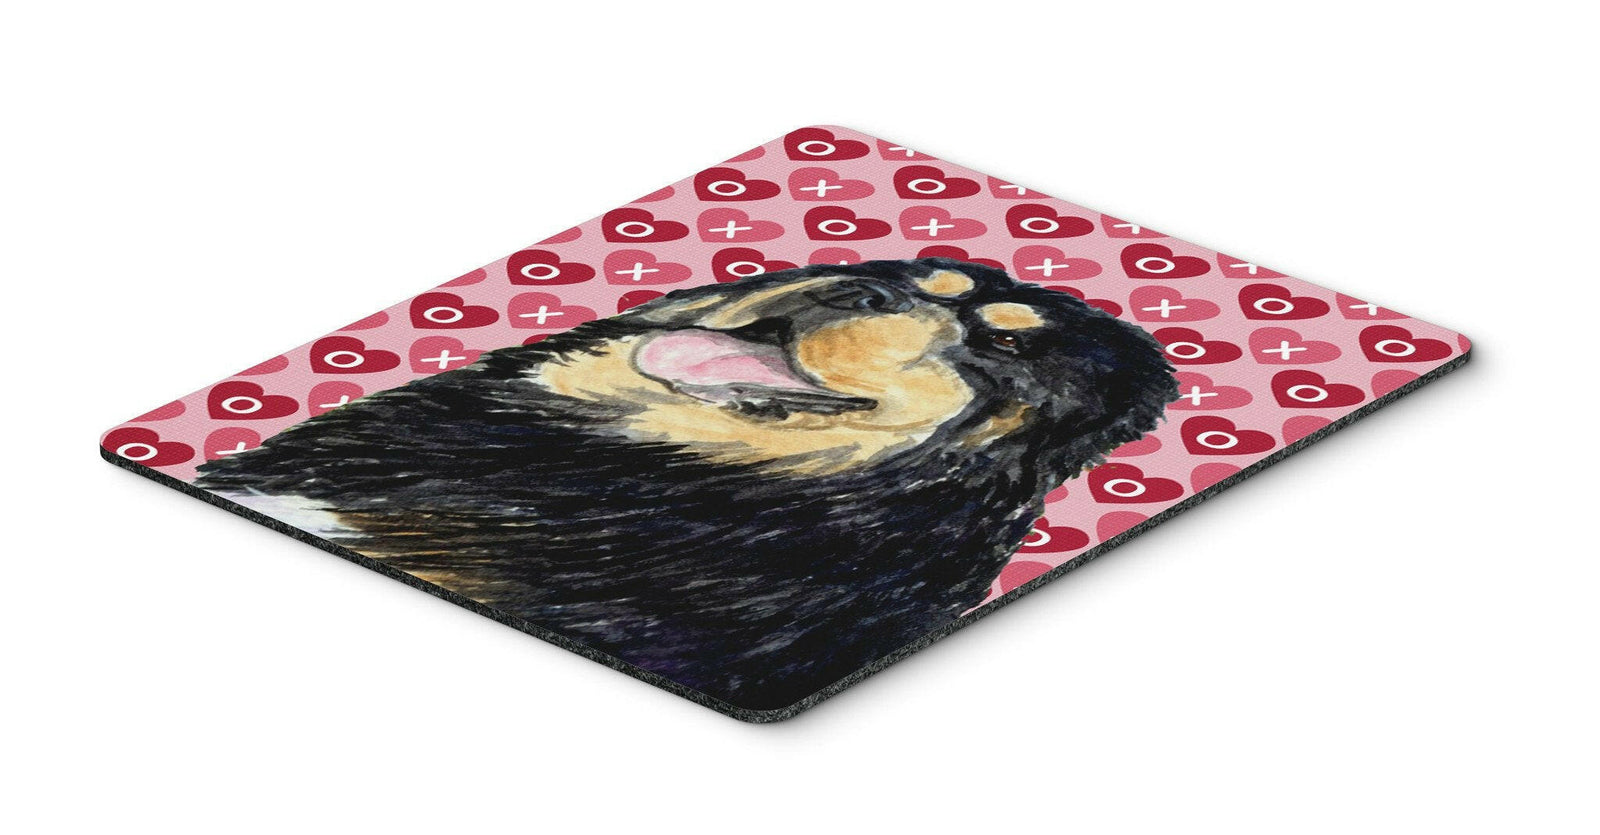 Tibetan Mastiff Hearts Love and Valentine's Day Mouse Pad, Hot Pad or Trivet by Caroline's Treasures